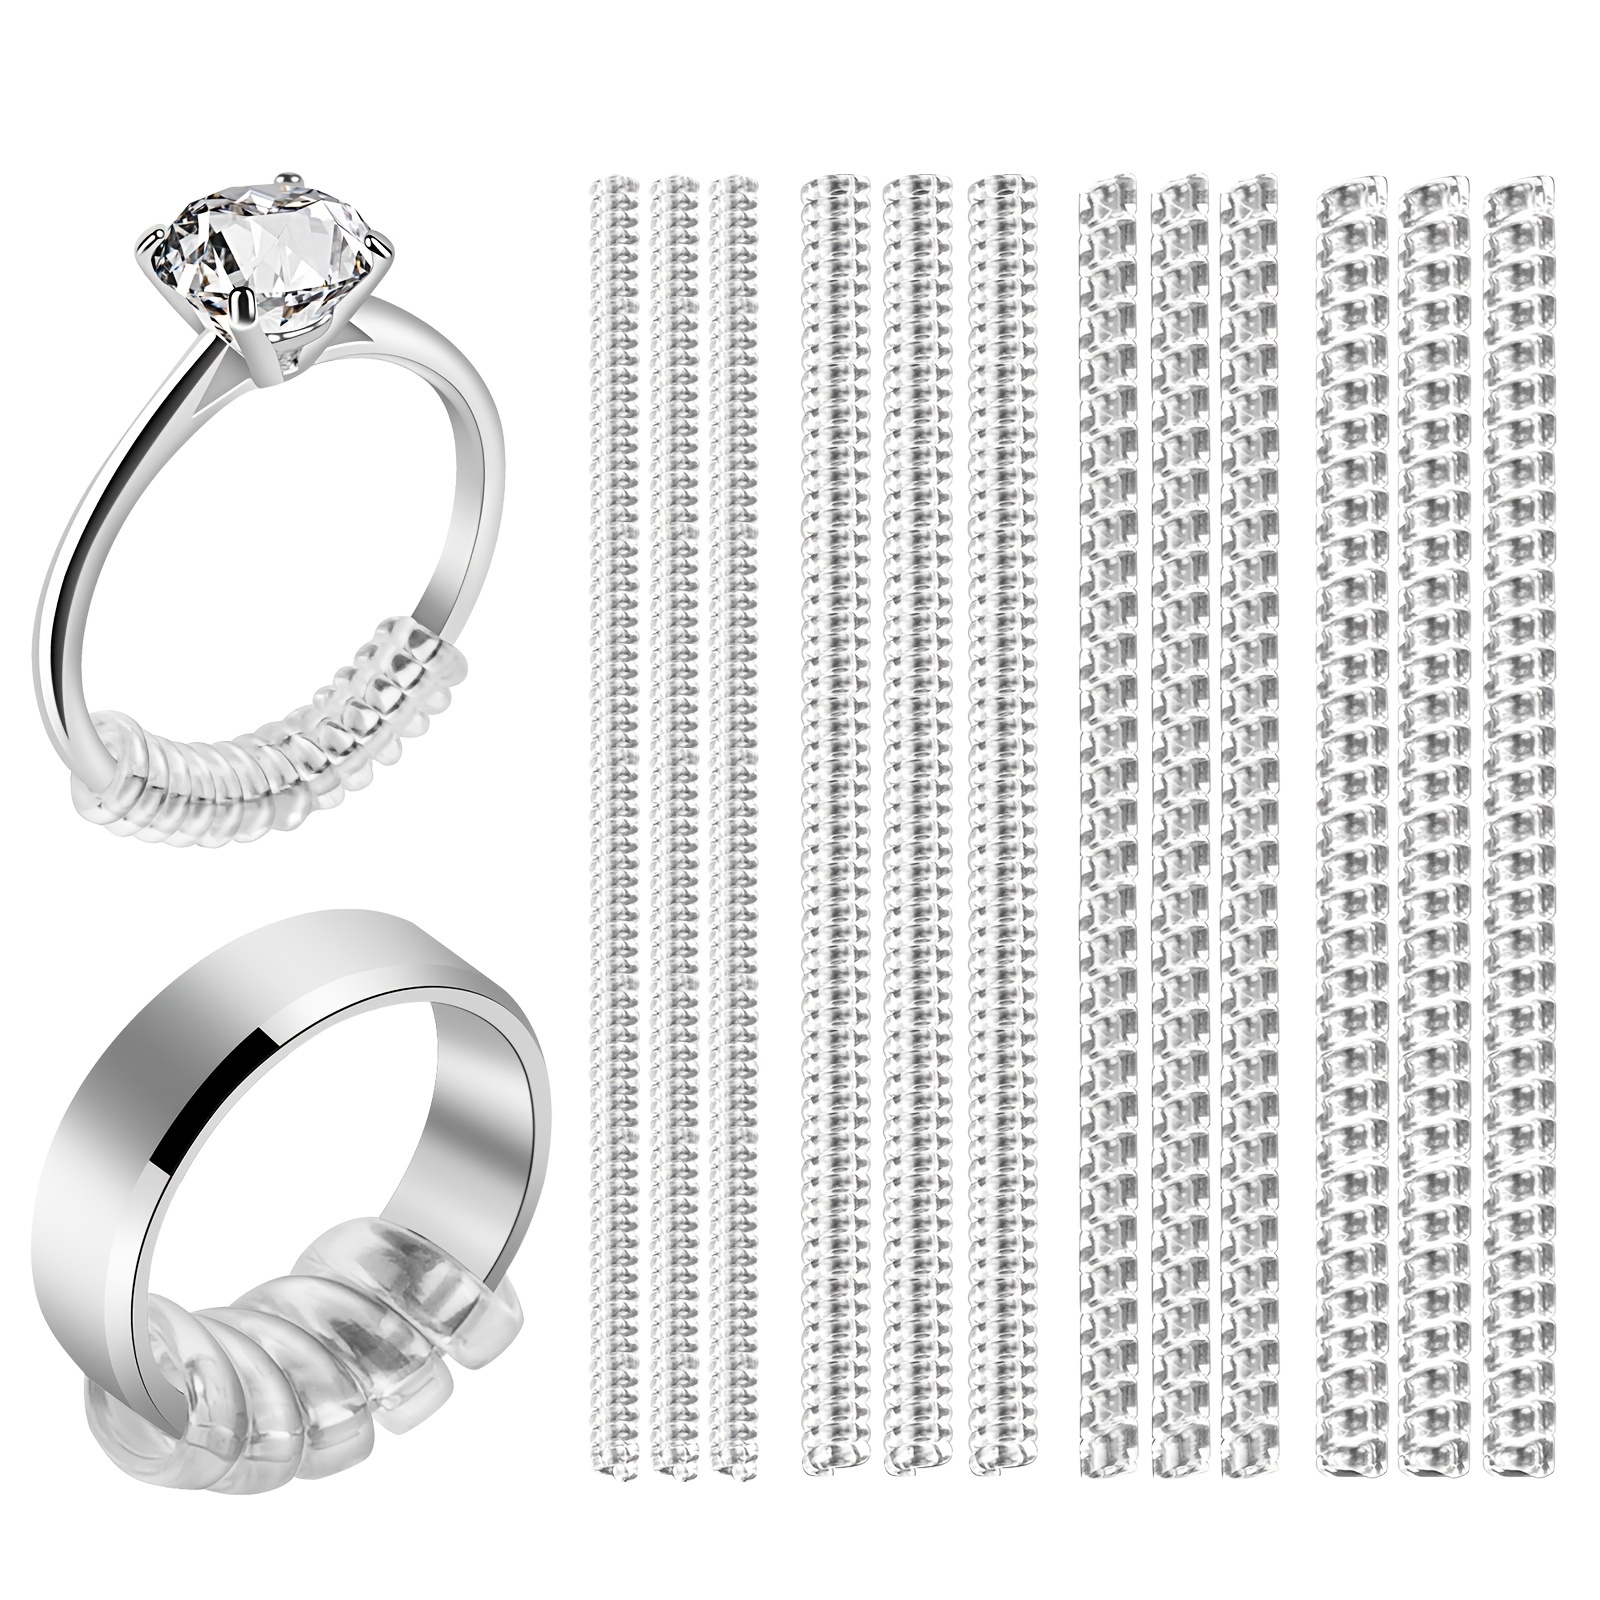 200 Best Ring Size Adjuster ideas  ring size adjuster, ring size